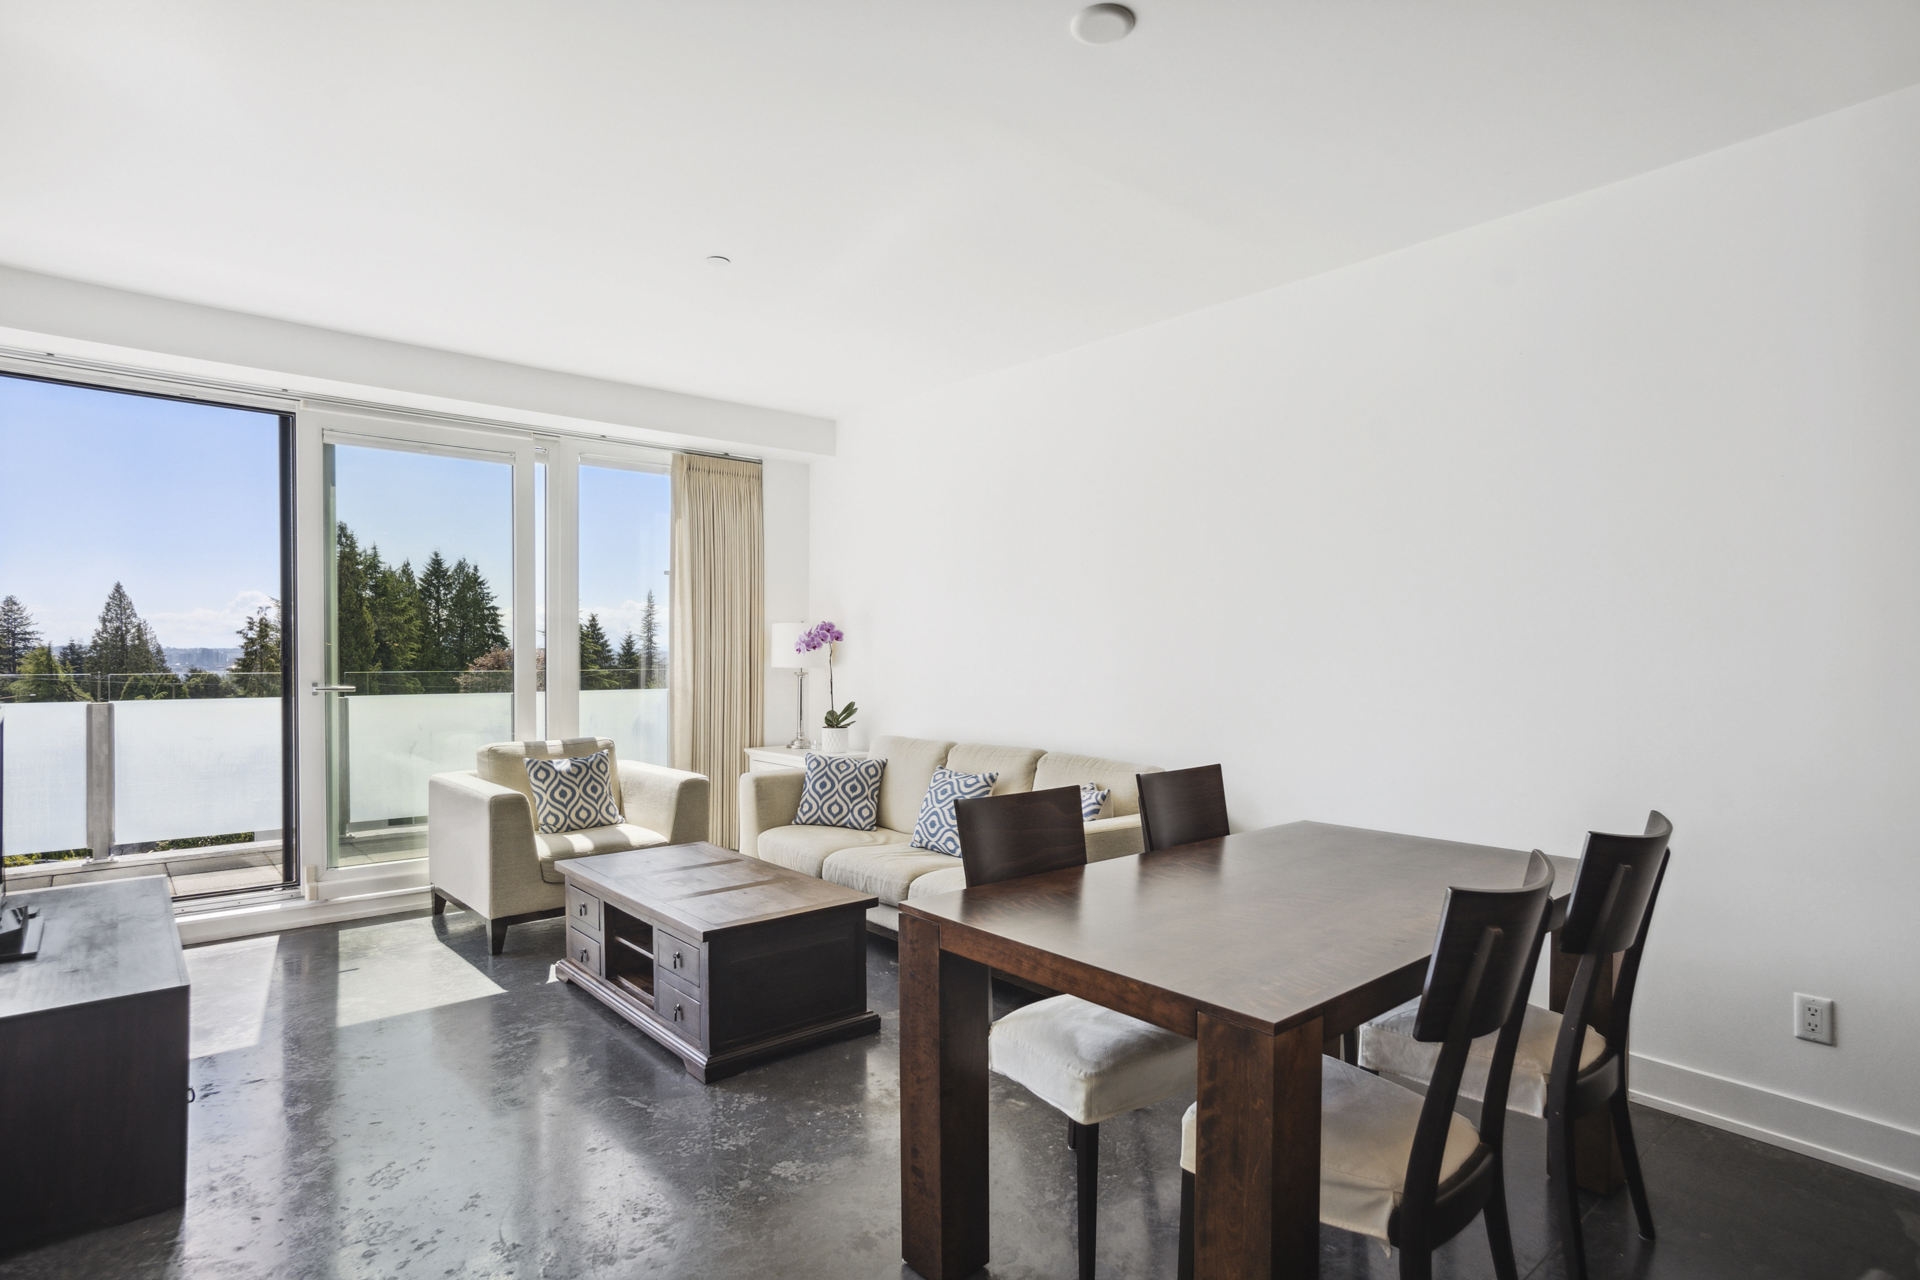 303 650 Evergreen Place, North Vancouver - For sale by Rossetti Realty - photo 3